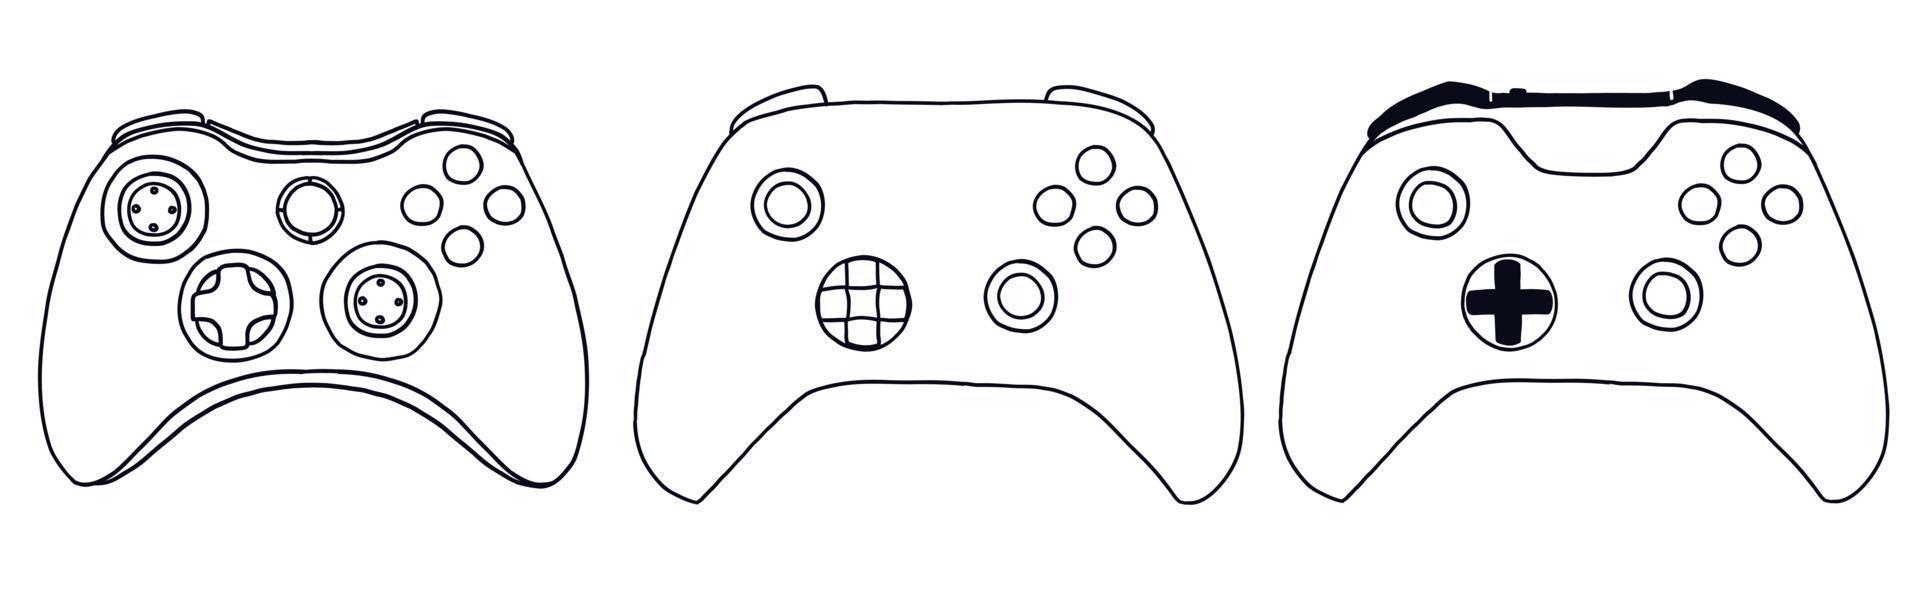 Hand-drawn game controllers set. Vector illustrations in outline doodle style. Icons on white background.